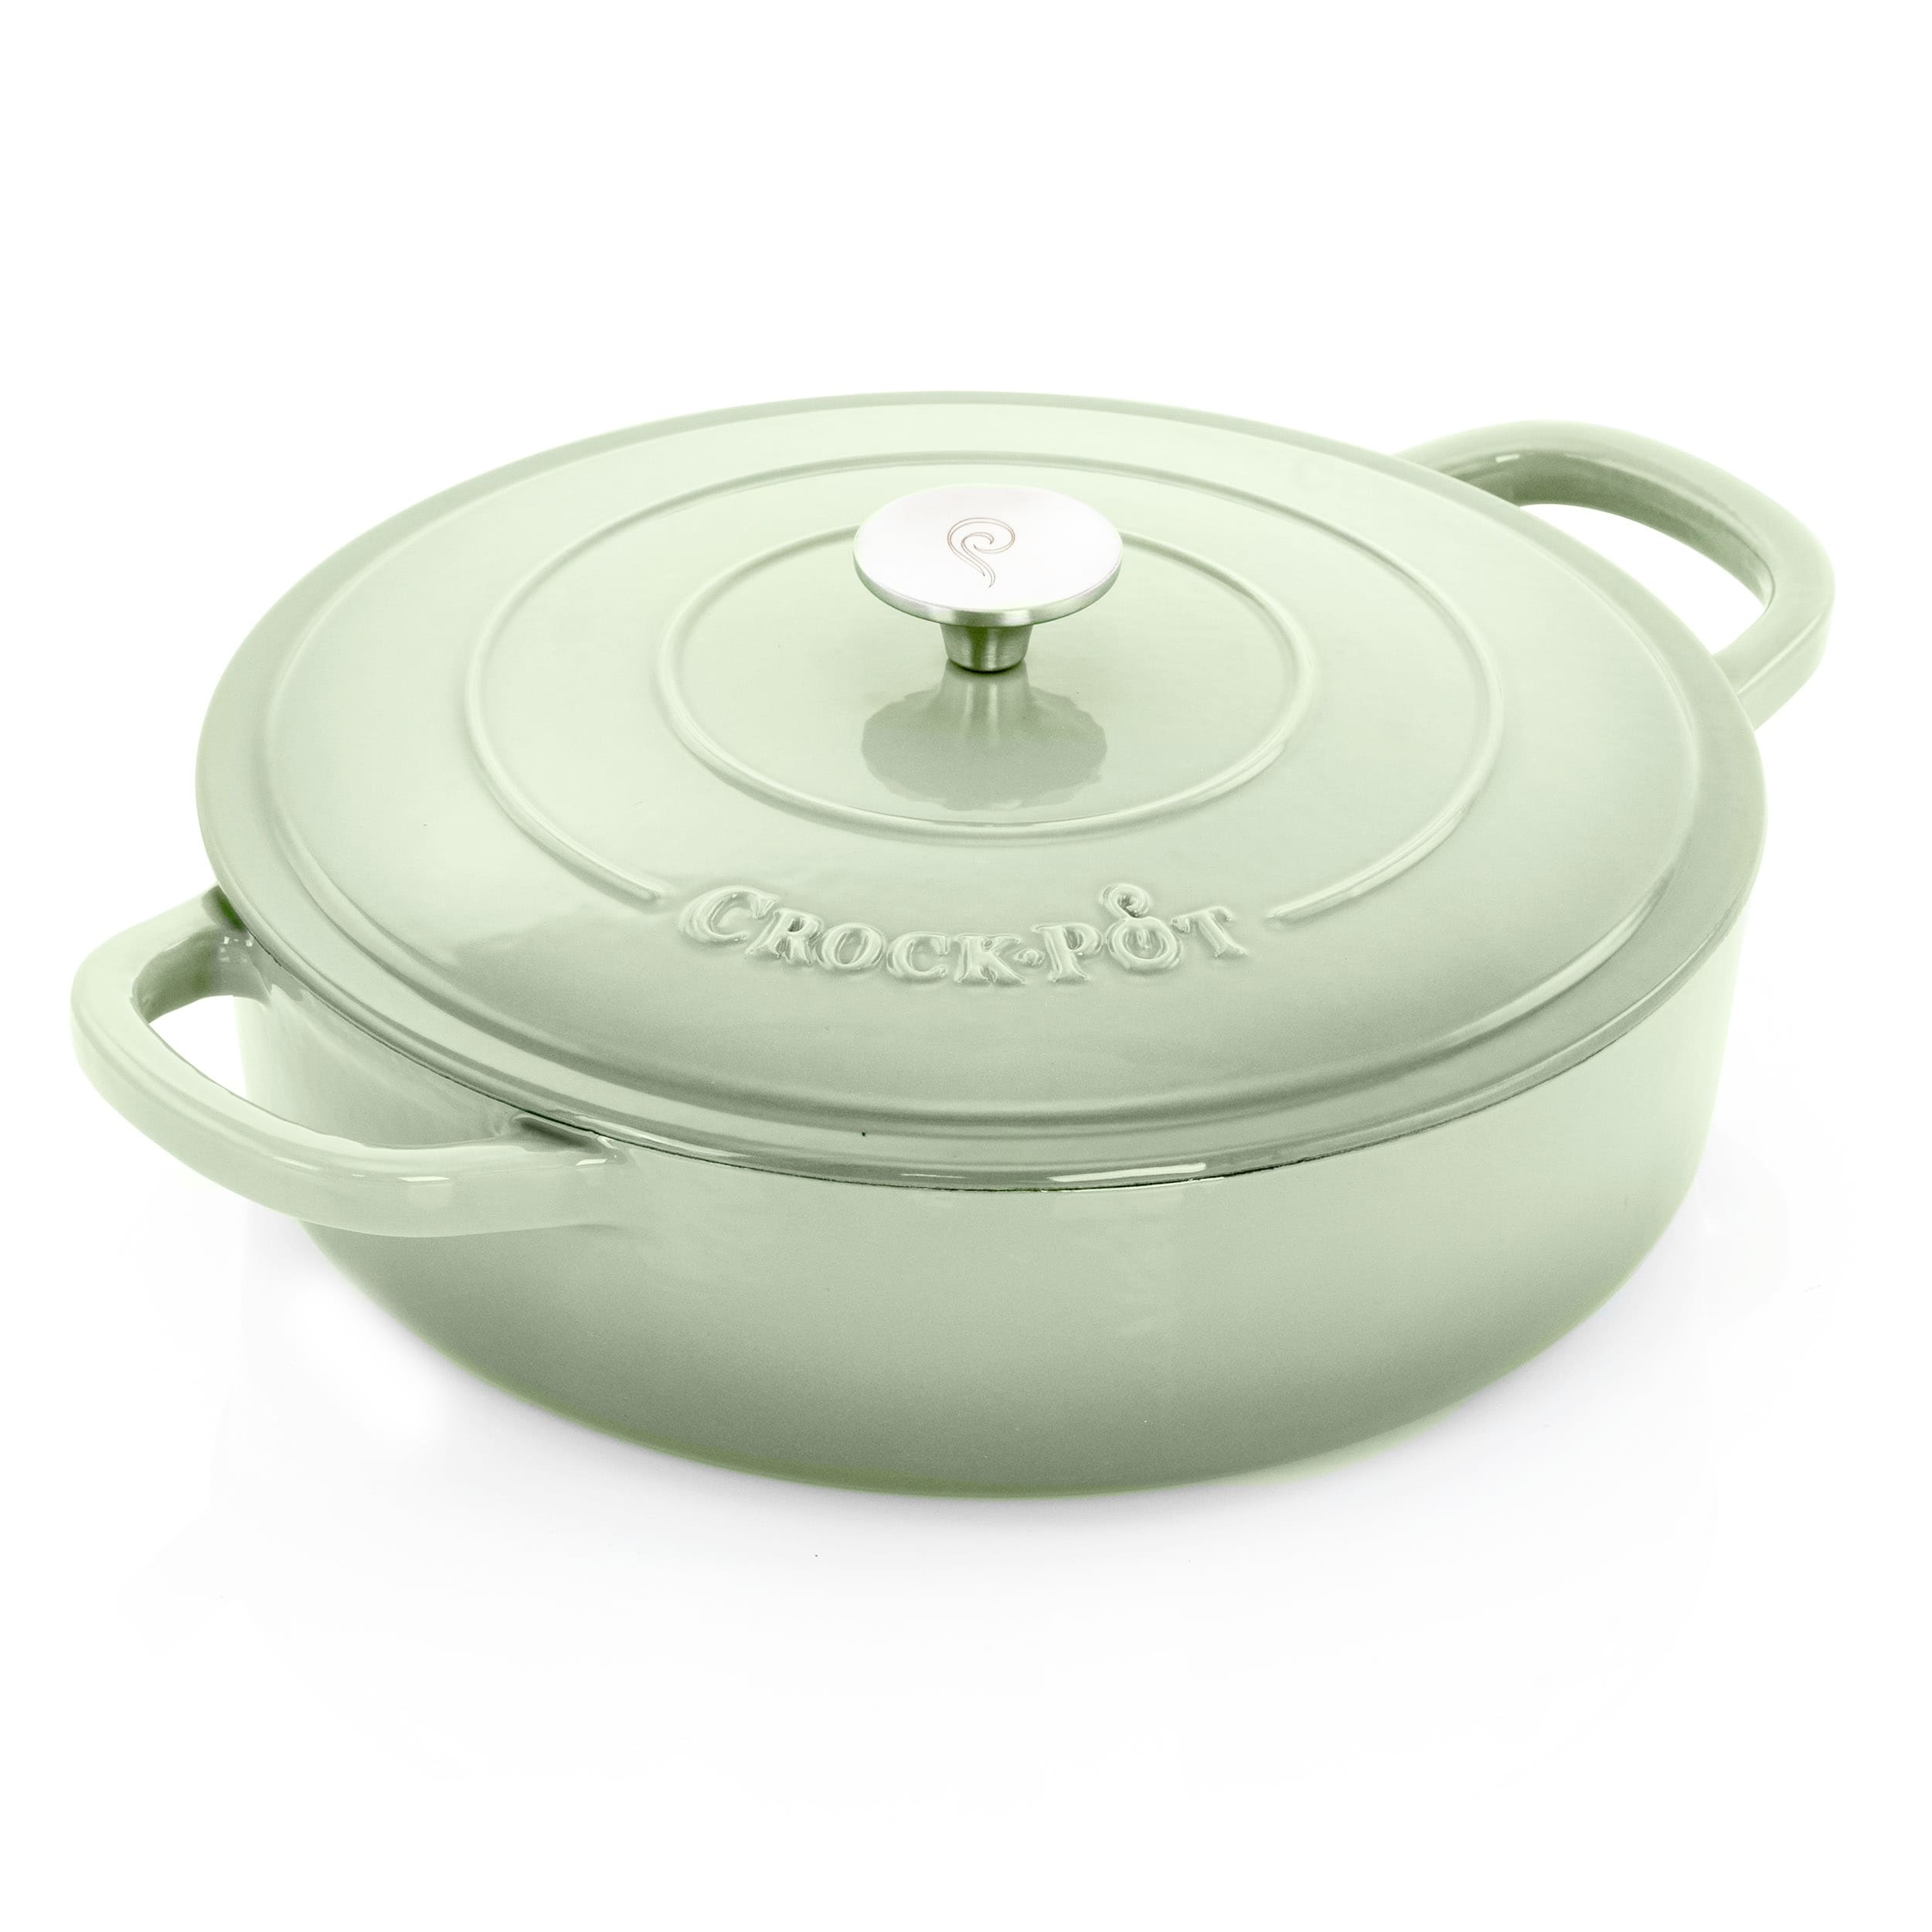 https://ak1.ostkcdn.com/images/products/is/images/direct/bc23a2563fdff6b9f9532ce0c3e18db0d5377fa8/Crock-Pot-Artisan-5-Quart-Round-Enameled-Cast-Iron-Braiser-Pan-with-Self-Basting-Lid-in-Pistachio-Green.jpg